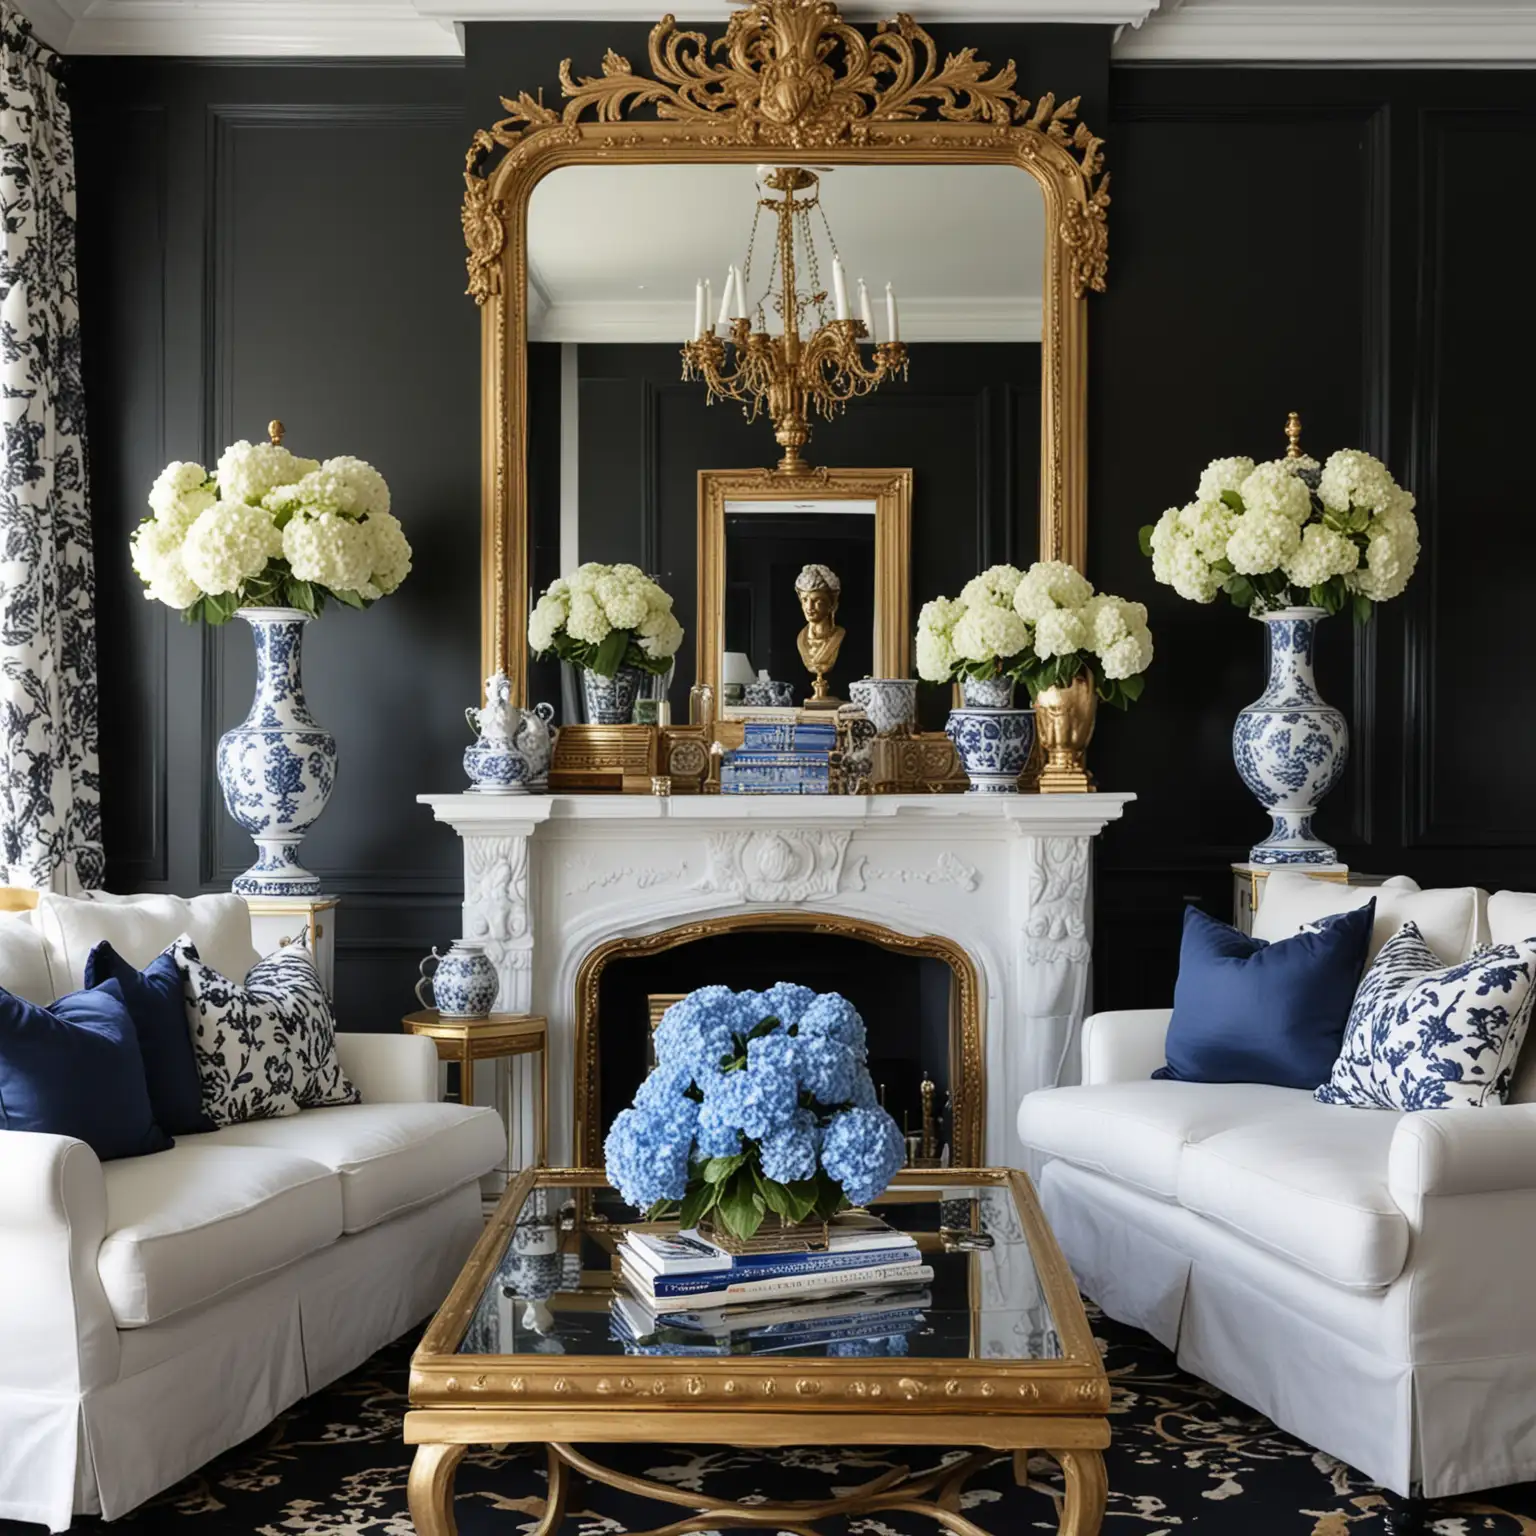 Elegant Traditional Living Room with Black Walls and Chinoiserie Accents